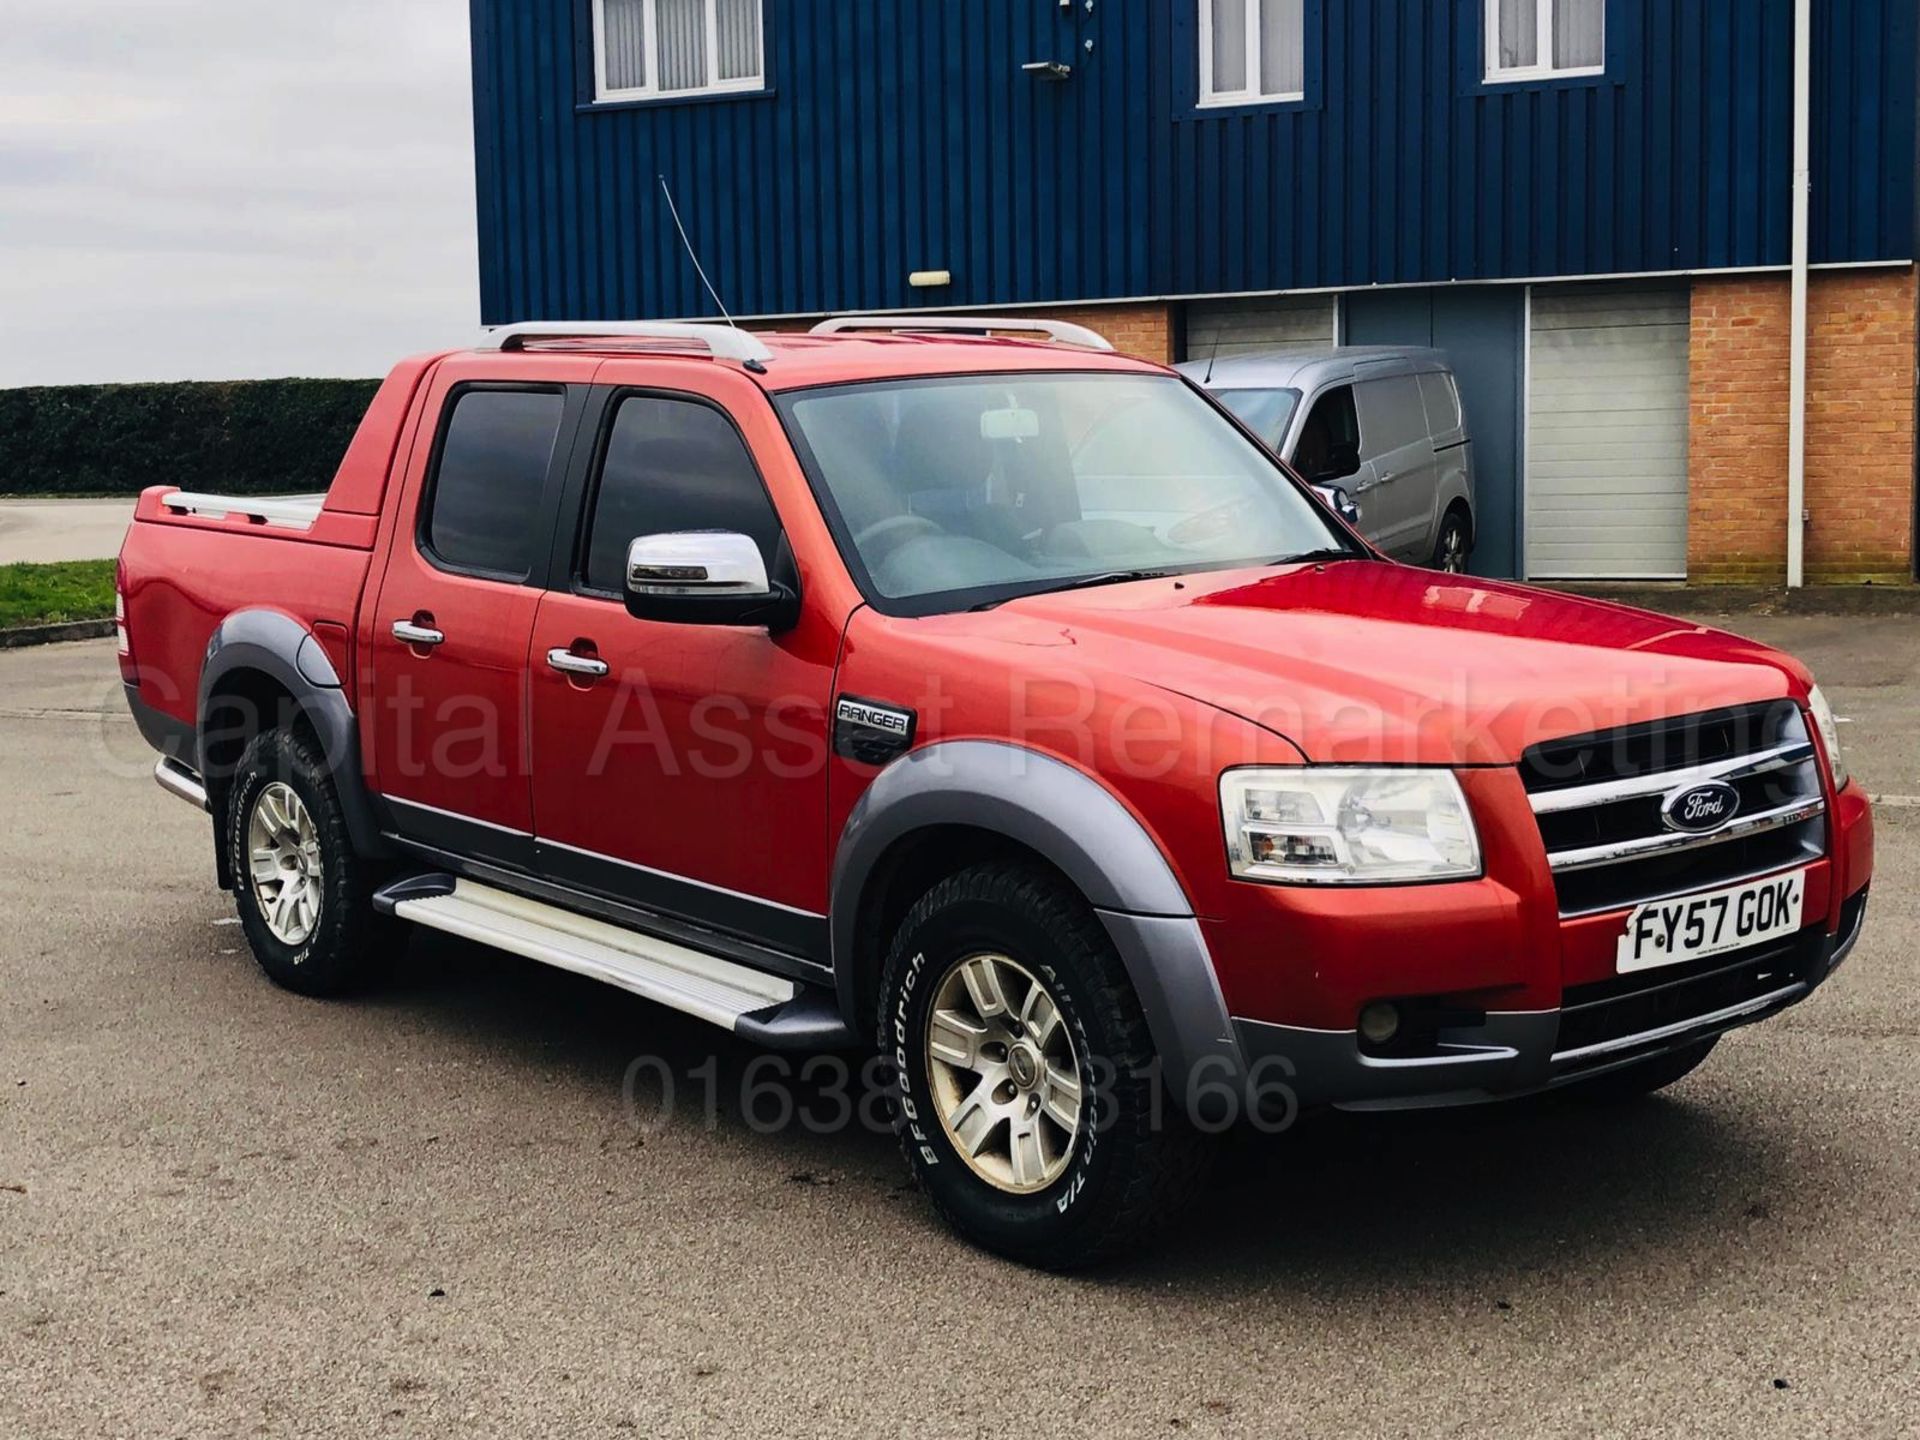 (On Sale) FORD RANGER *WILDTRAK EDITION* D/CAB PICK-UP (57 REG) '3.0 TDCI - 5 SPEED' **AIR CON**